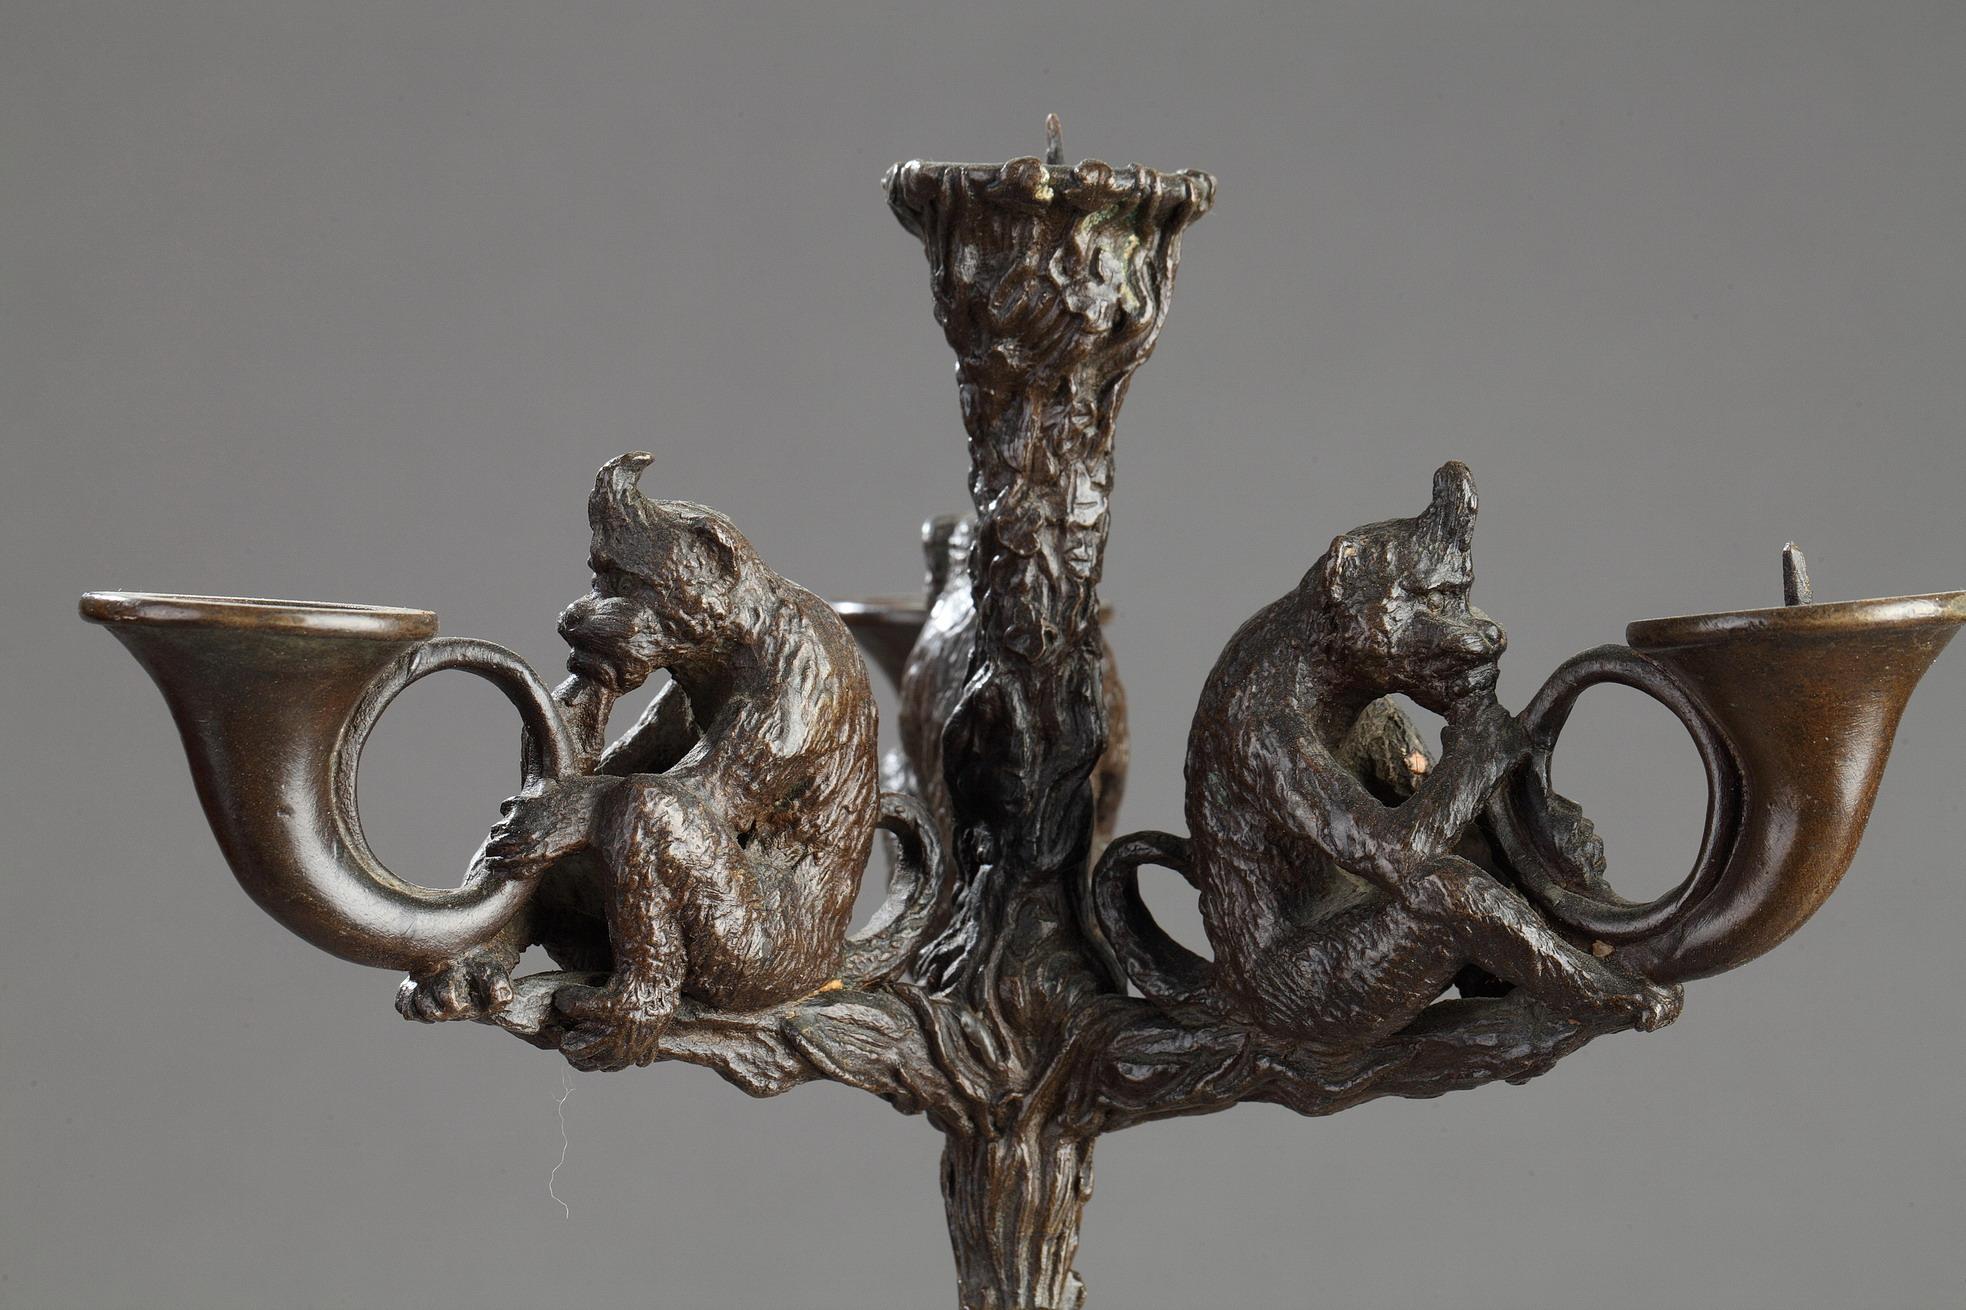 Pair of monkey candelabras
by Christophe FRATIN (1801-1864)

Bronze with nuanced dark brown patina
signed 